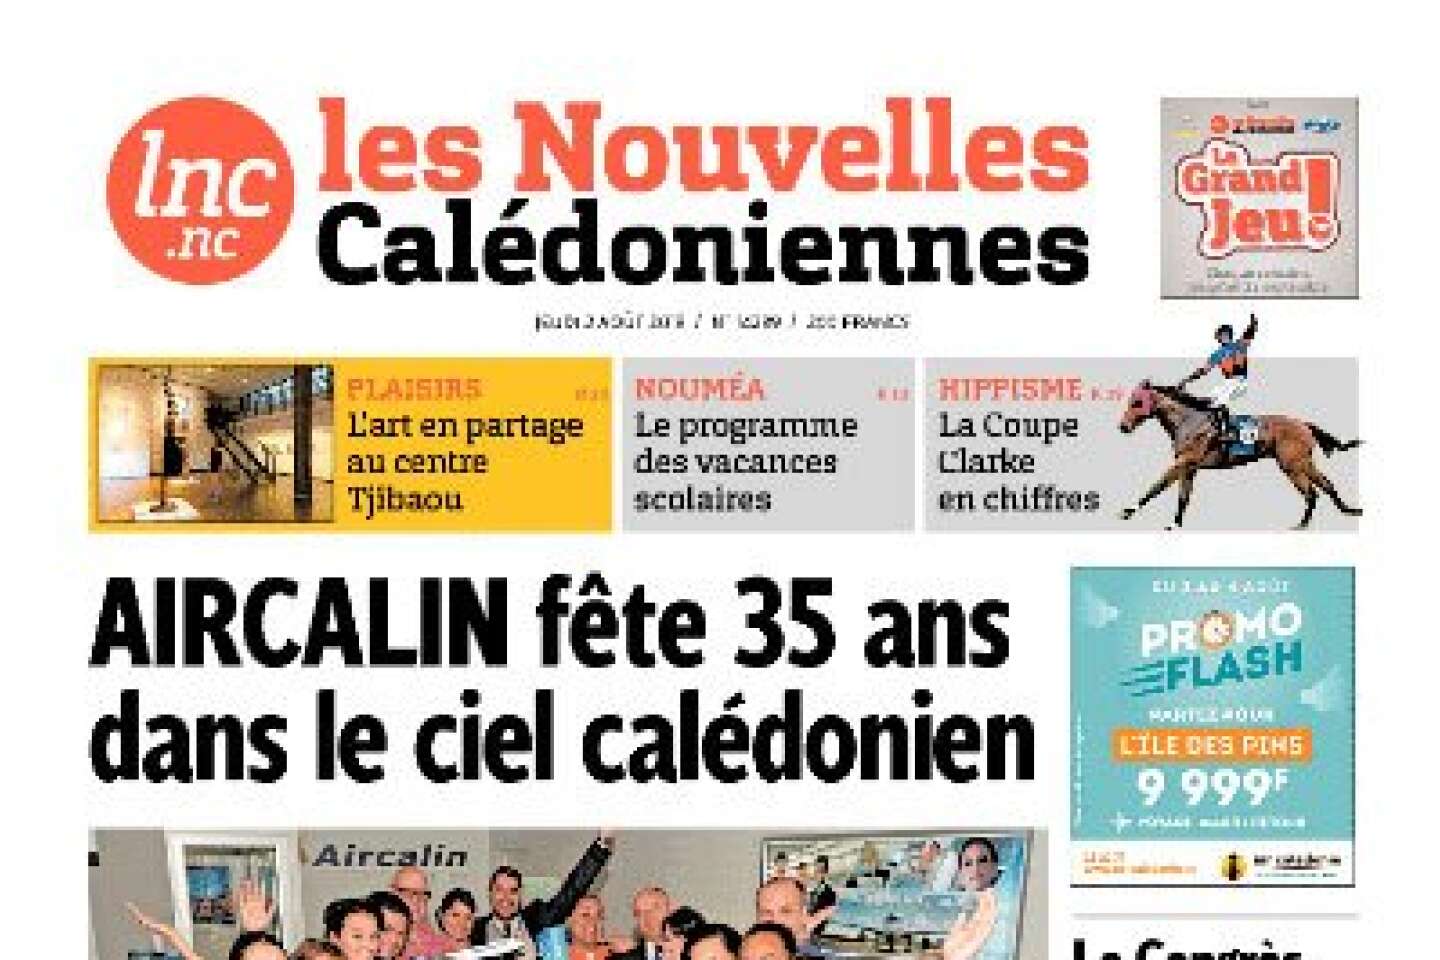 “Les Nouvelles calédoniennes”, the only daily newspaper in the archipelago, will disappear